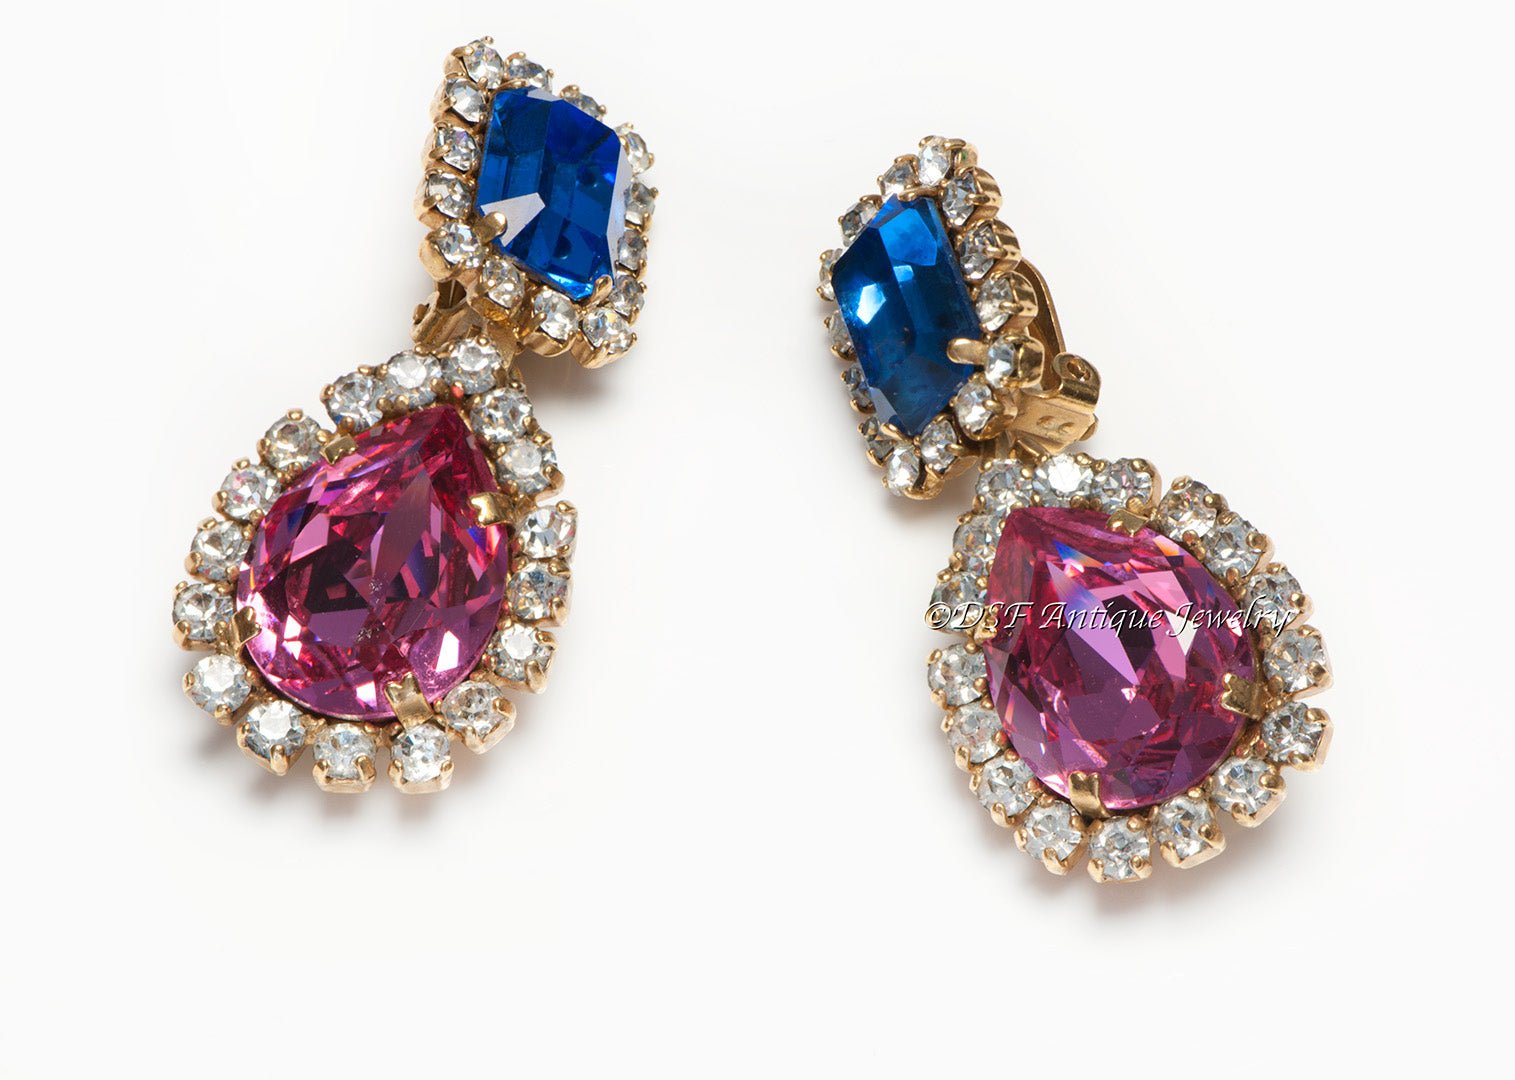 Chanel Paris Spring 1995 Barbie Collection Pink Blue Crystal Earrings